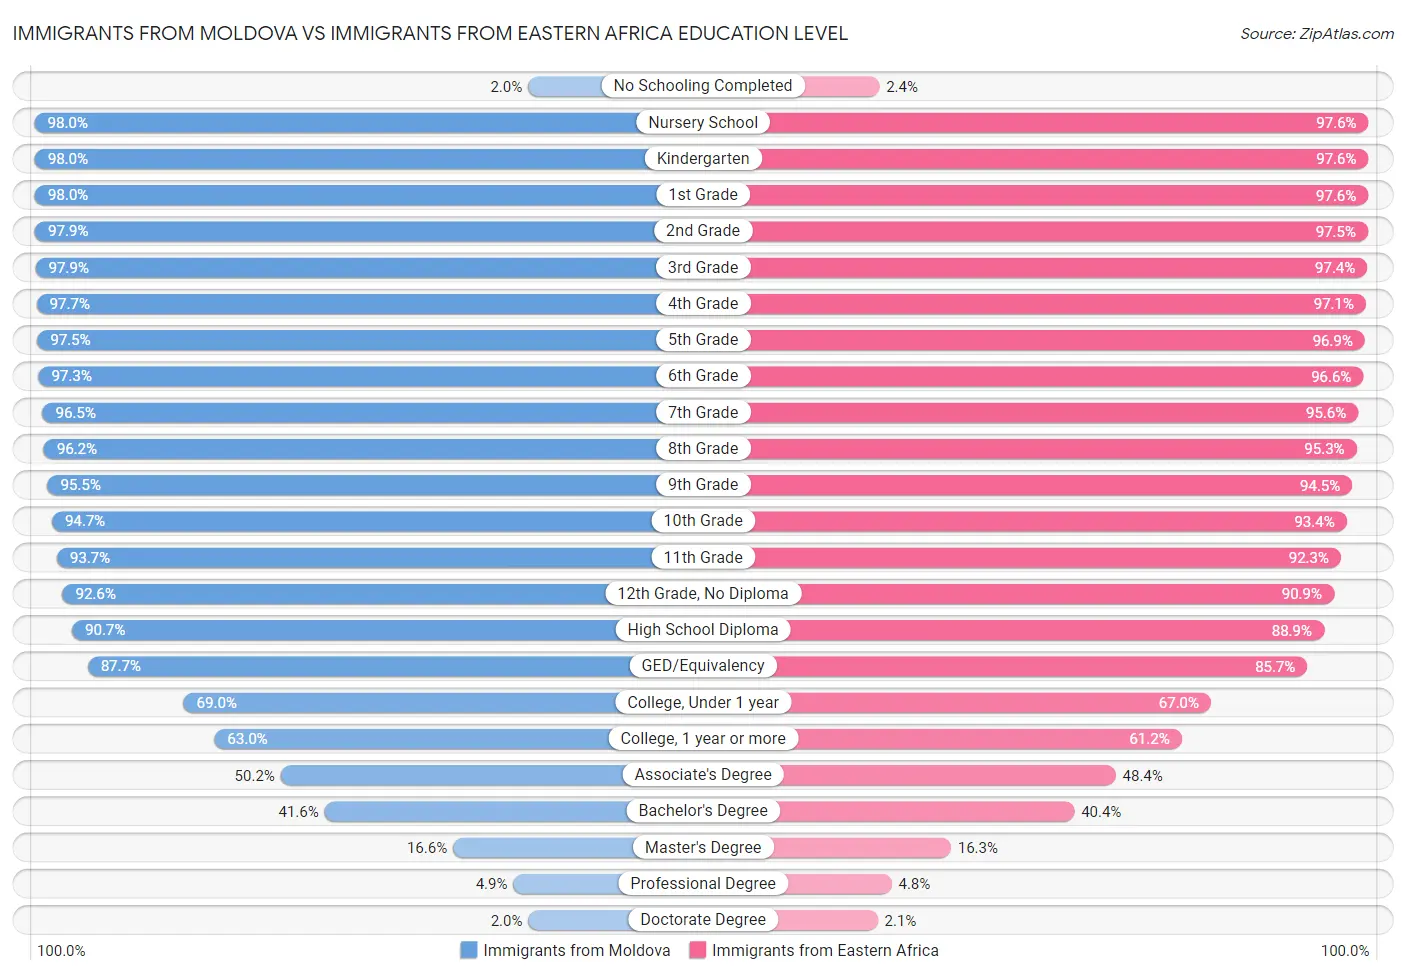 Immigrants from Moldova vs Immigrants from Eastern Africa Education Level